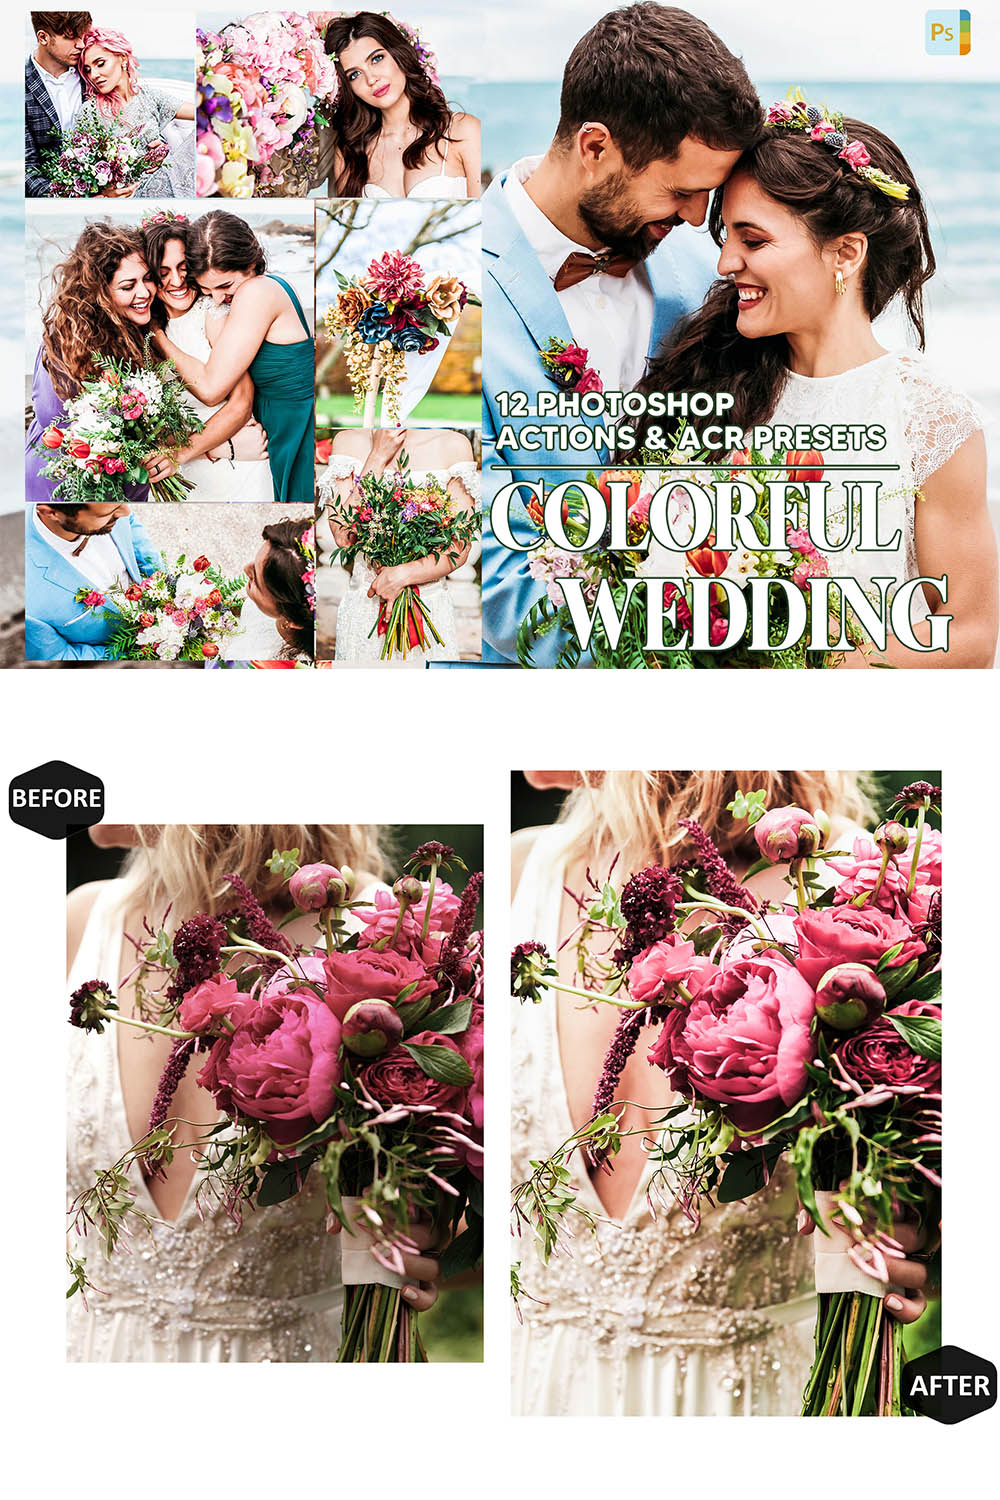 12 Photoshop Actions, Colorful Wedding Ps Action, Vibrant ACR Preset, Bright Ps Filter, Atn Portrait And Lifestyle Theme For Instagram, Blogger pinterest preview image.